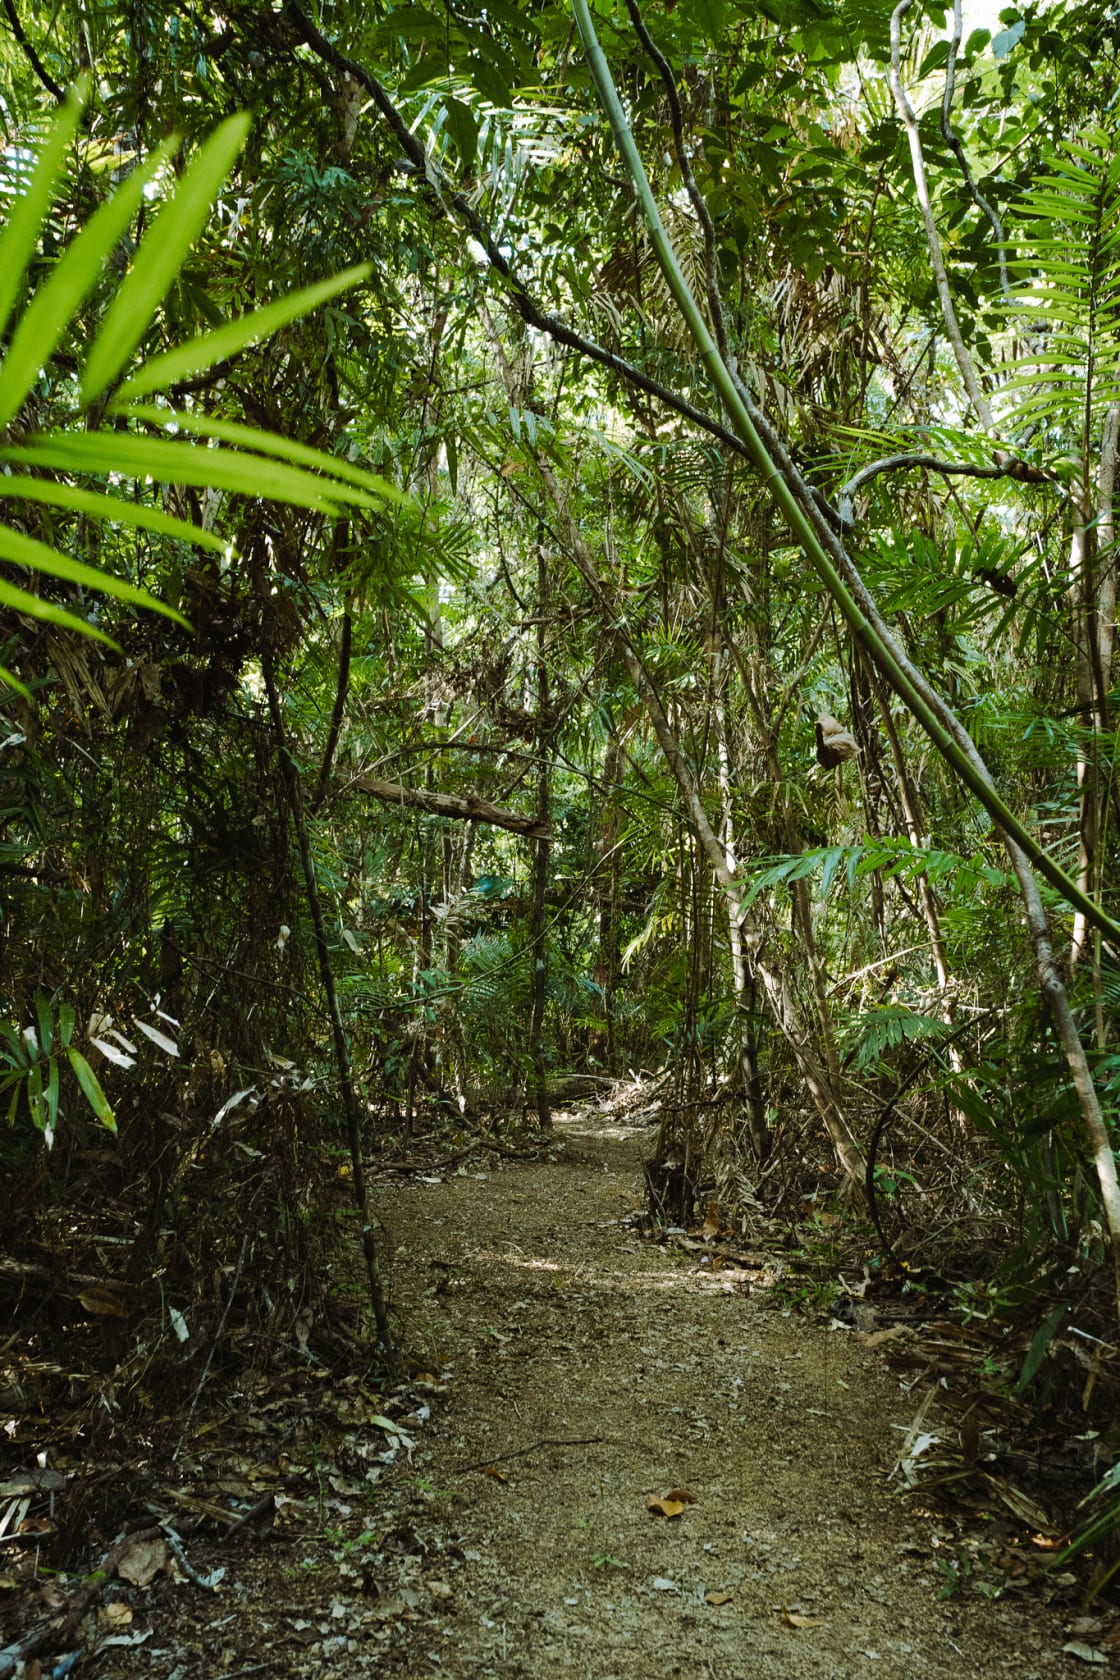 A lot of trials leading out of the camp for walks/hikes around the Daintree